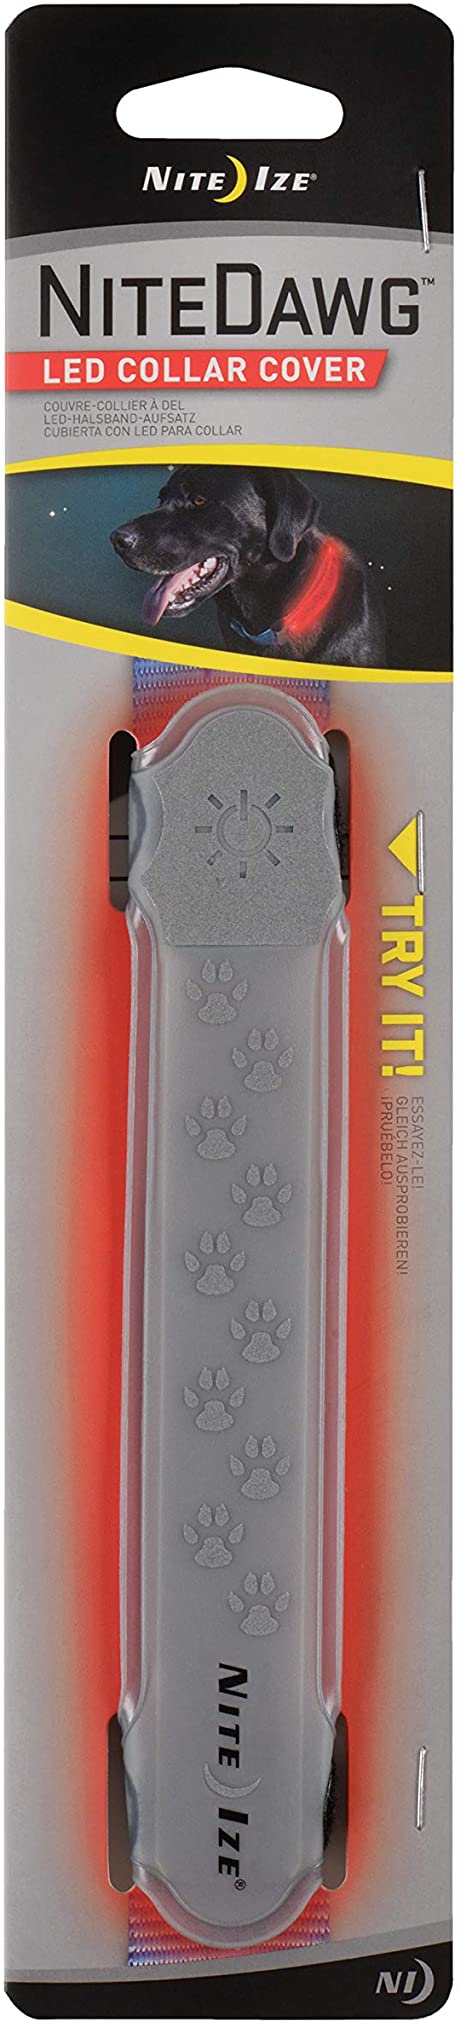 Nite Ize Nite Dawg LED Collar Cover, Universal Fit, Light Up Dog Collar Cover, Grey With Red LED